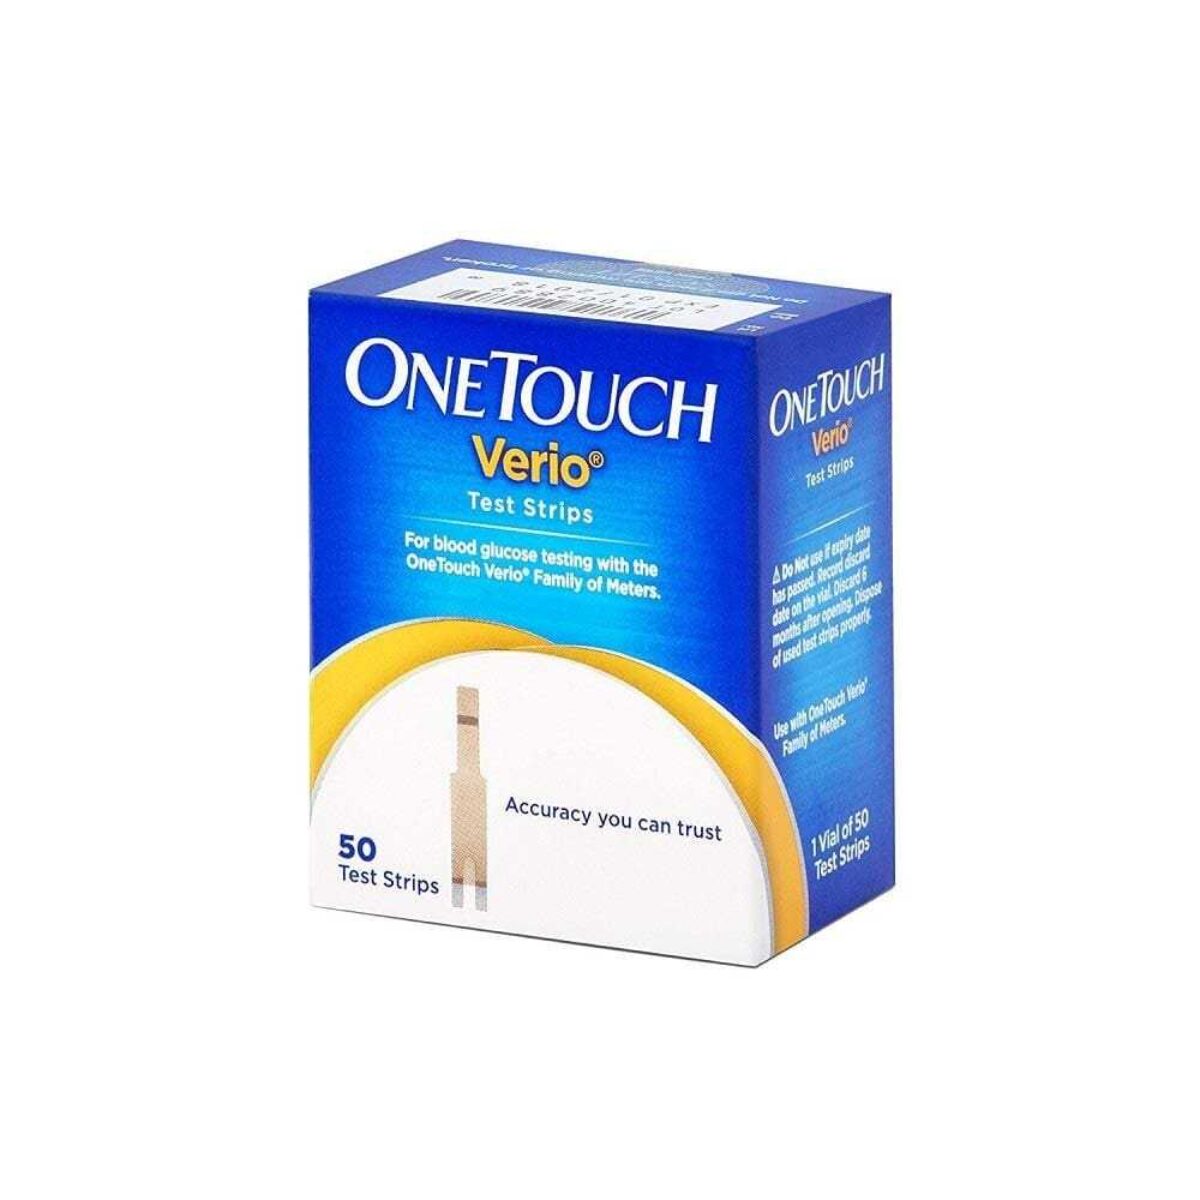 OneTouch Verio 100 Test Strips - Huge Discount - Free Shipping